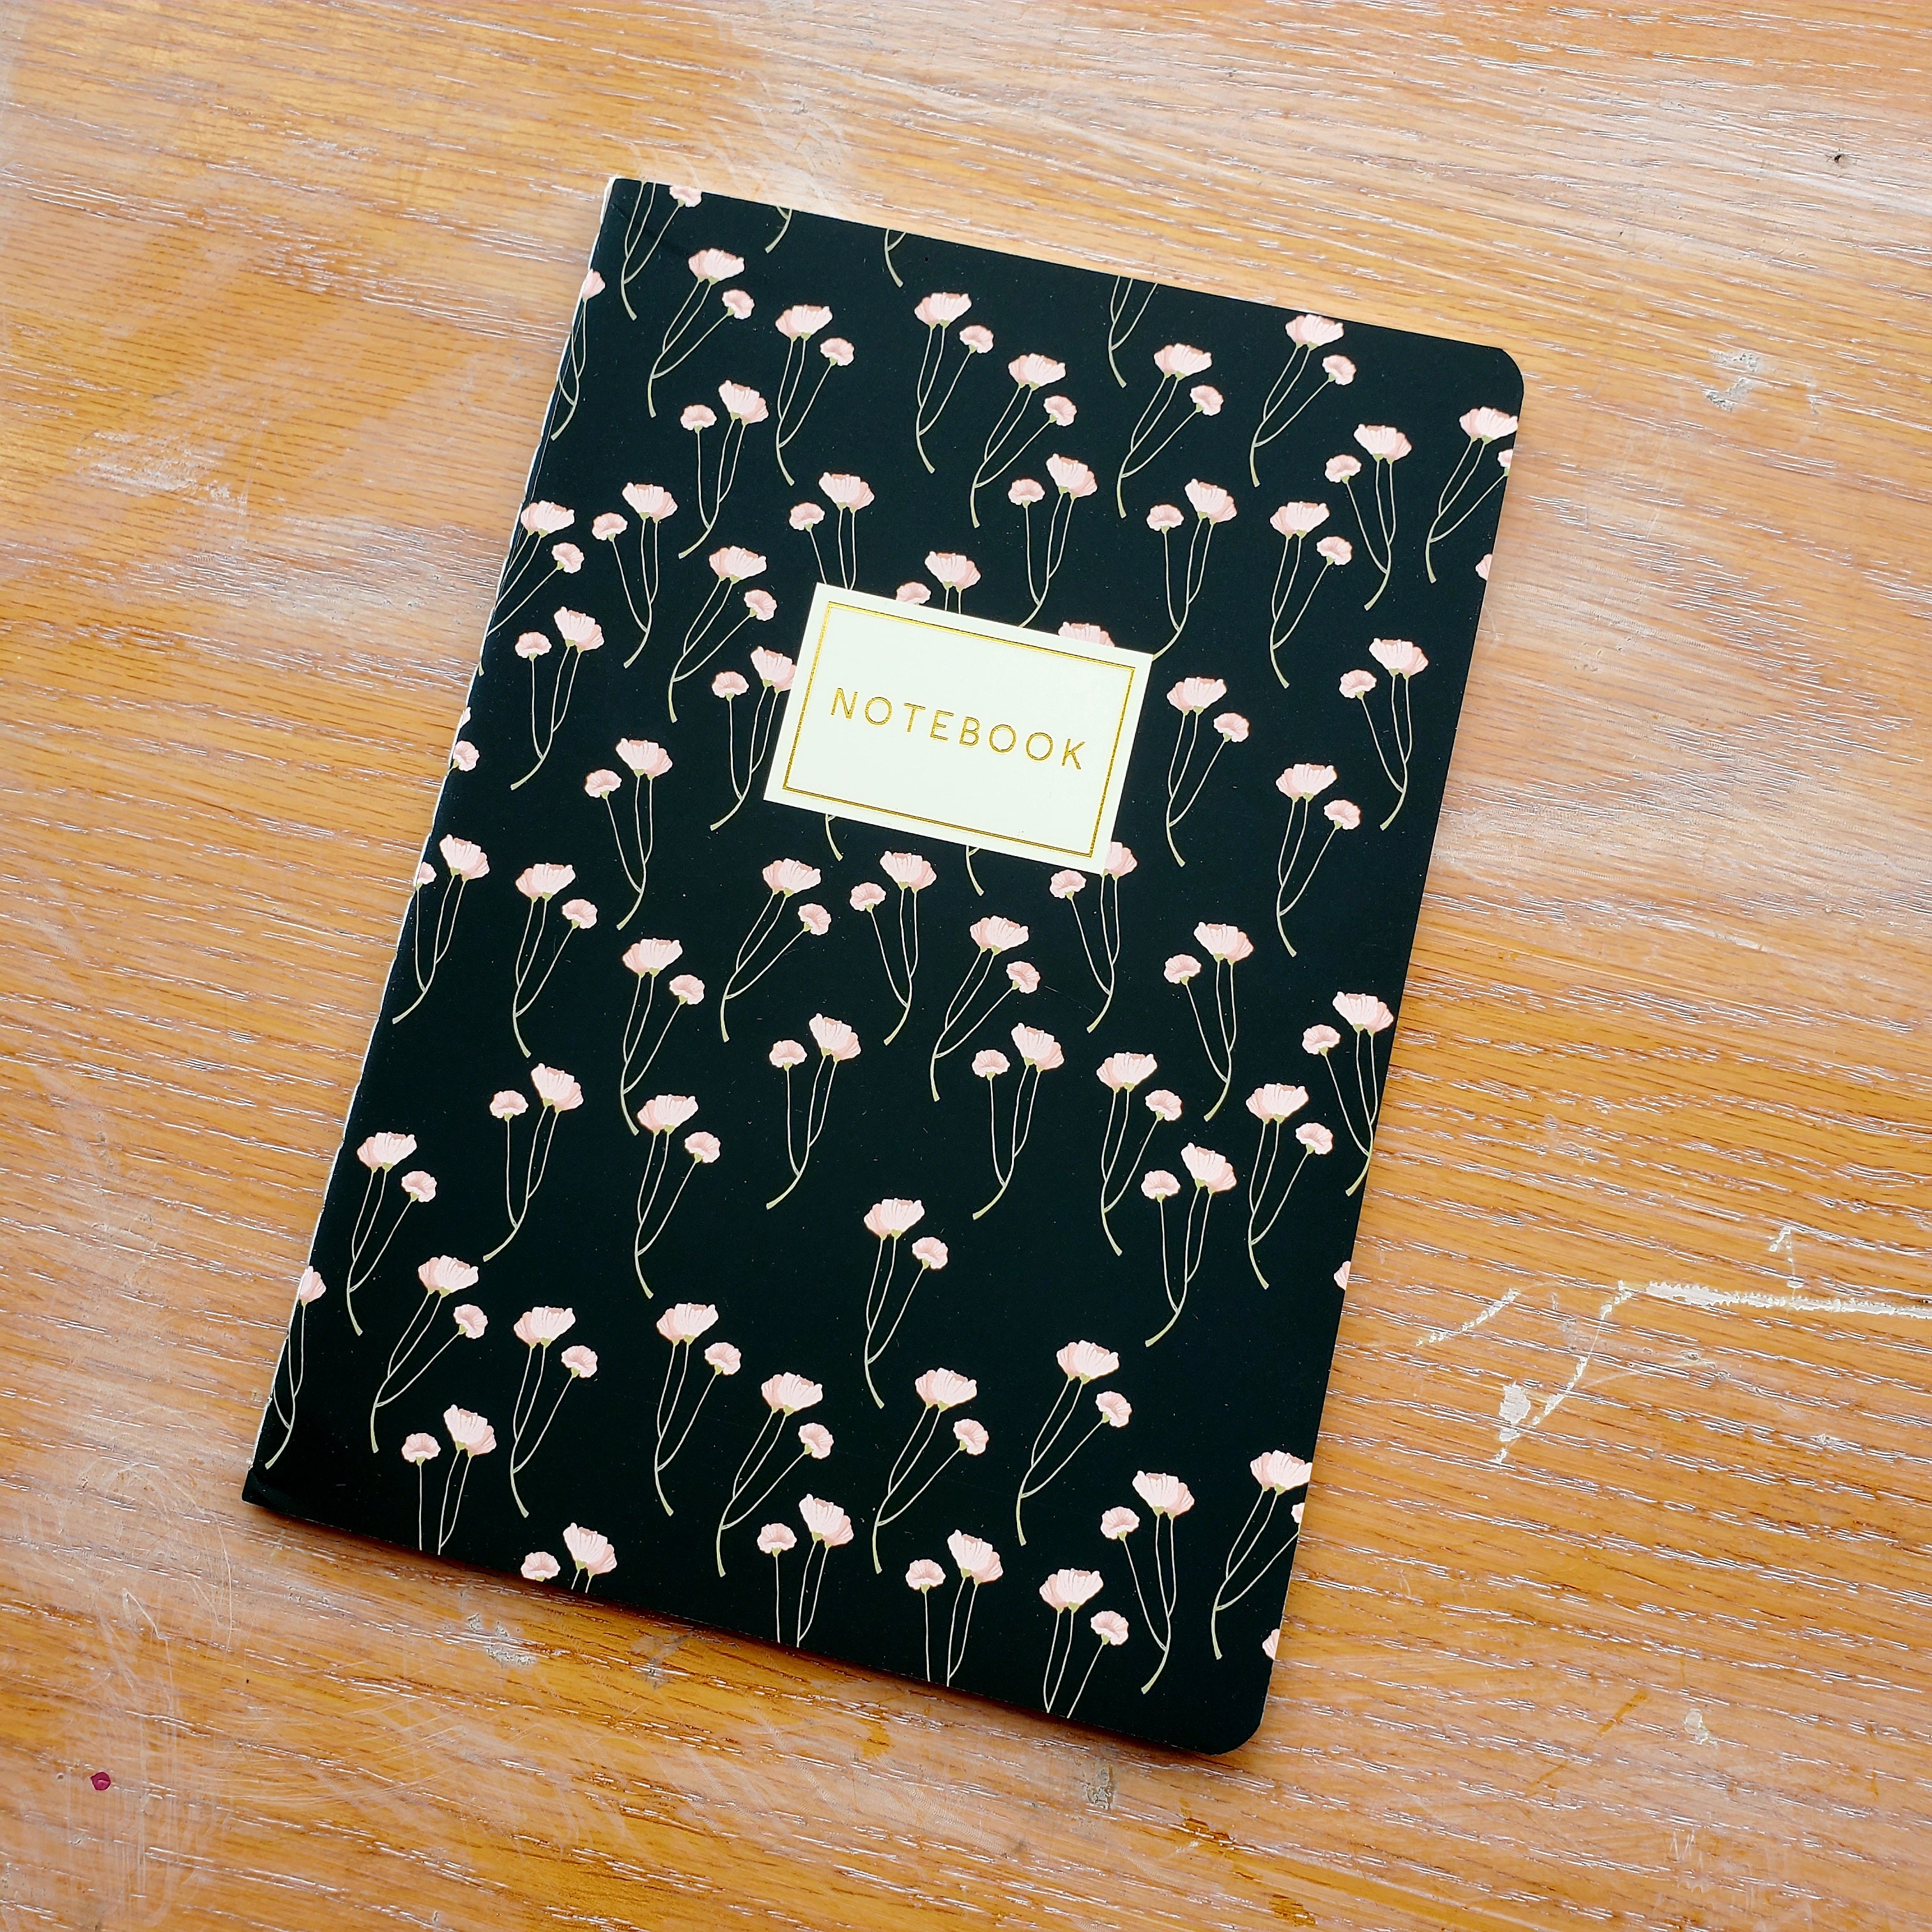 Poppies on Black Notebook